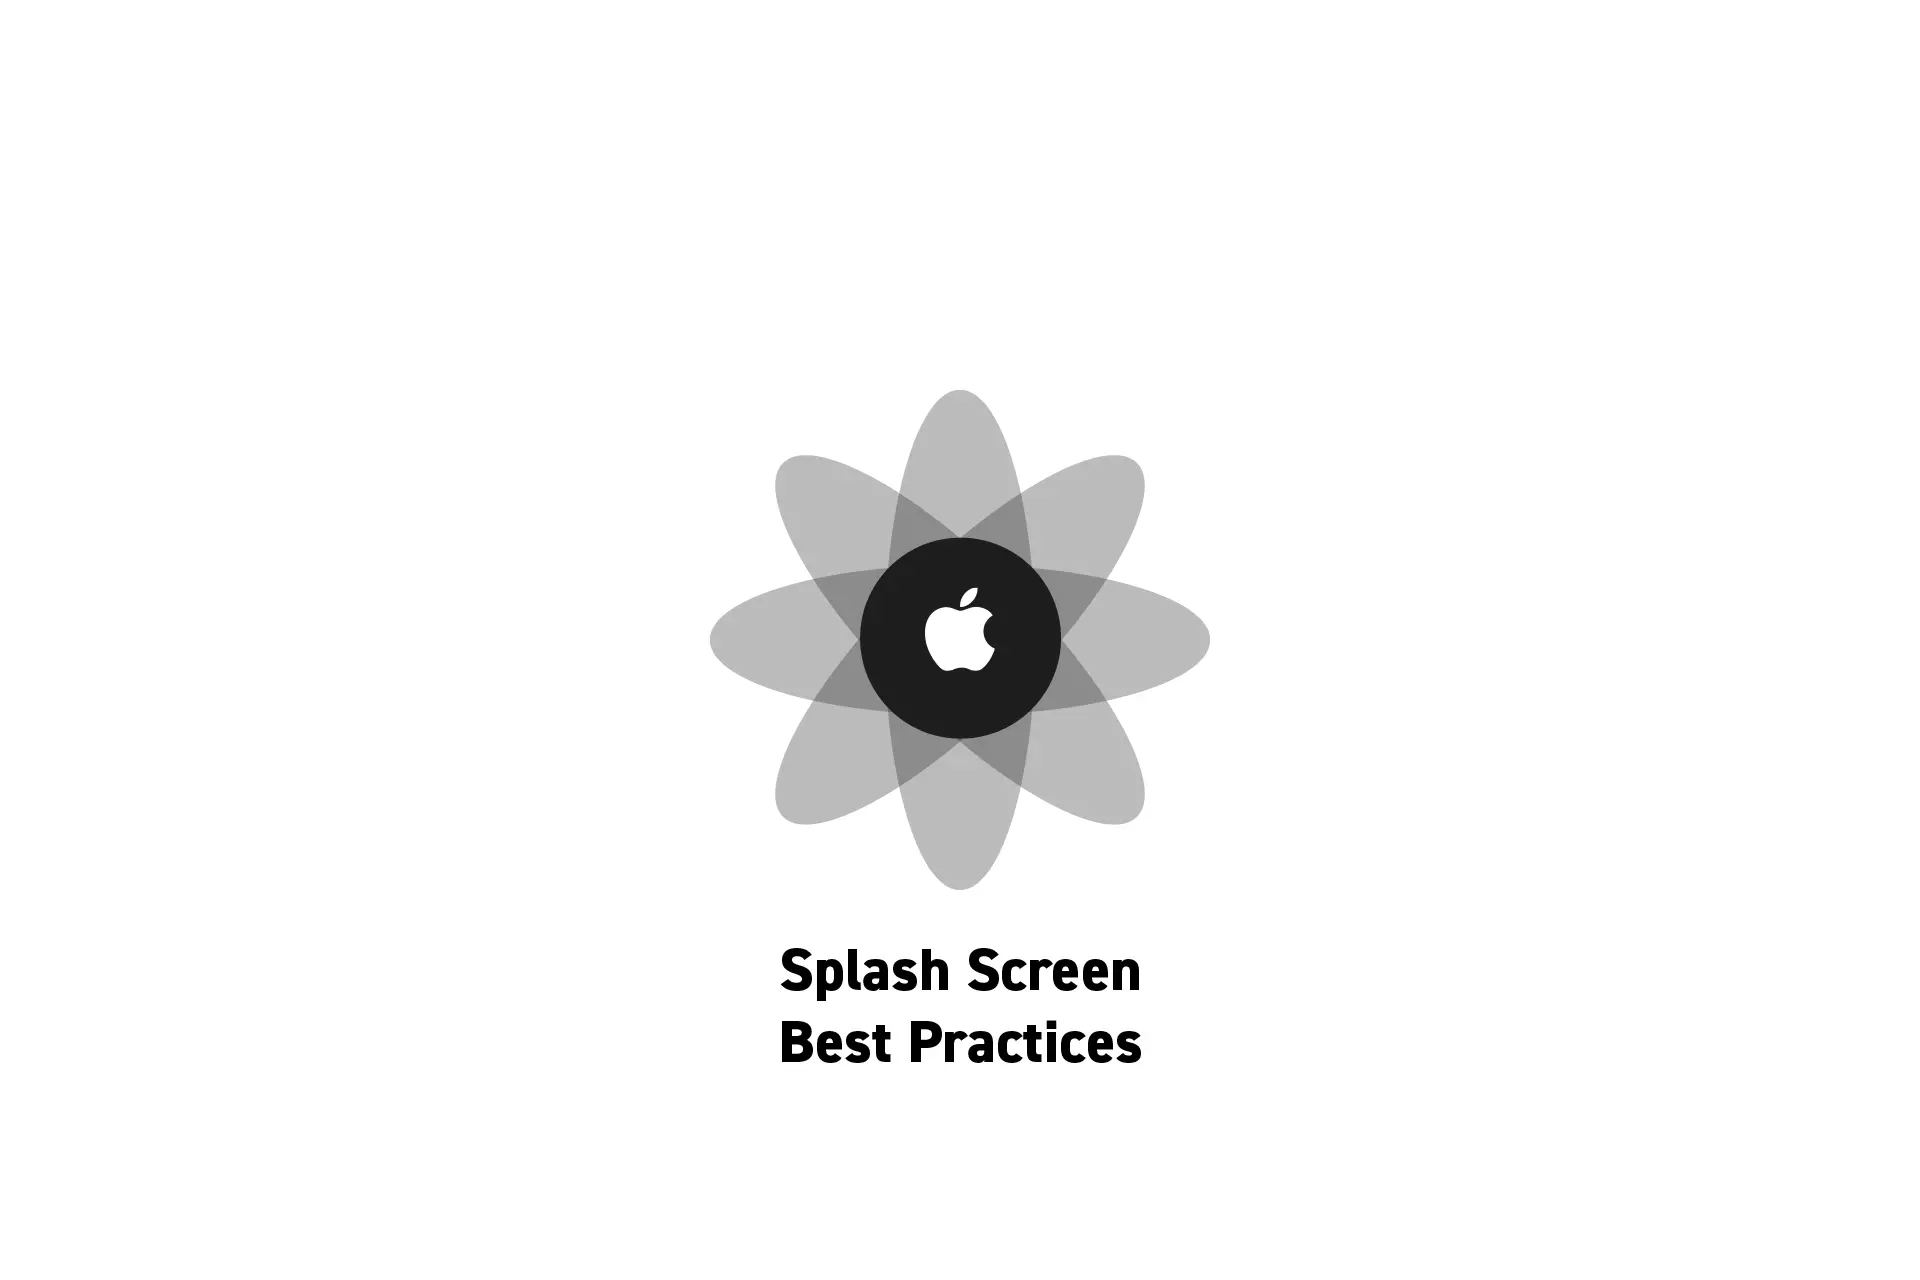 <p>A flower that represents Apple with the text "Splash Screen<br />Best Practices" beneath it.</p>